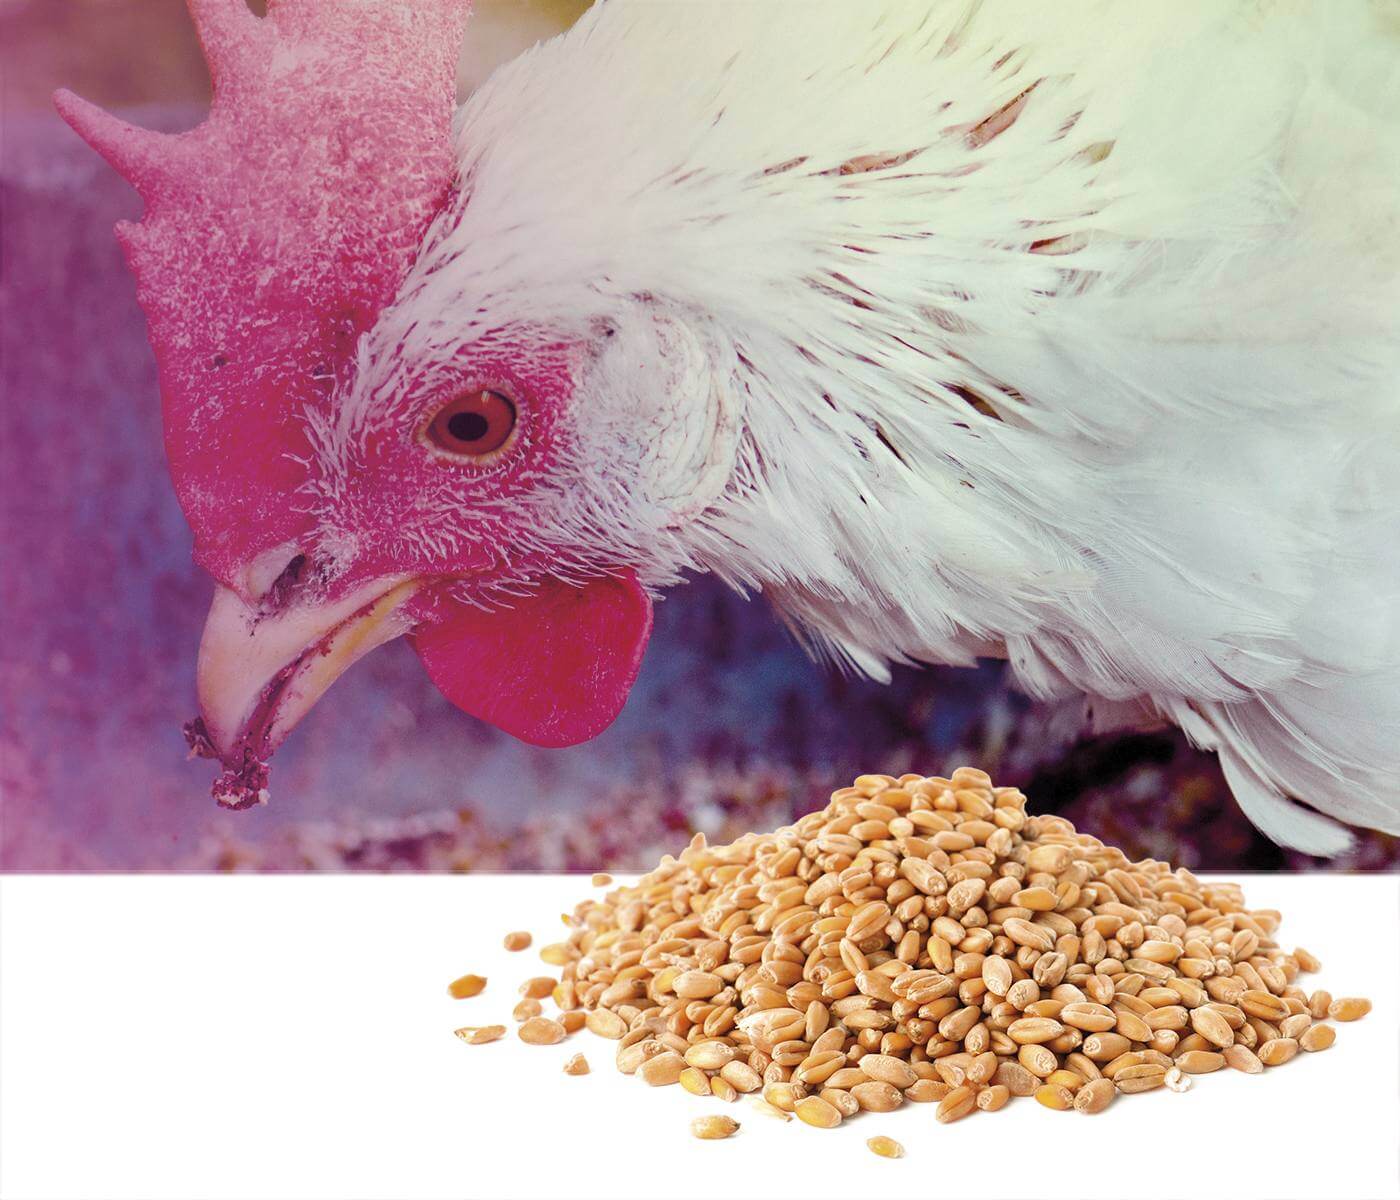 Accumulation and elimination of mycotoxins in poultry